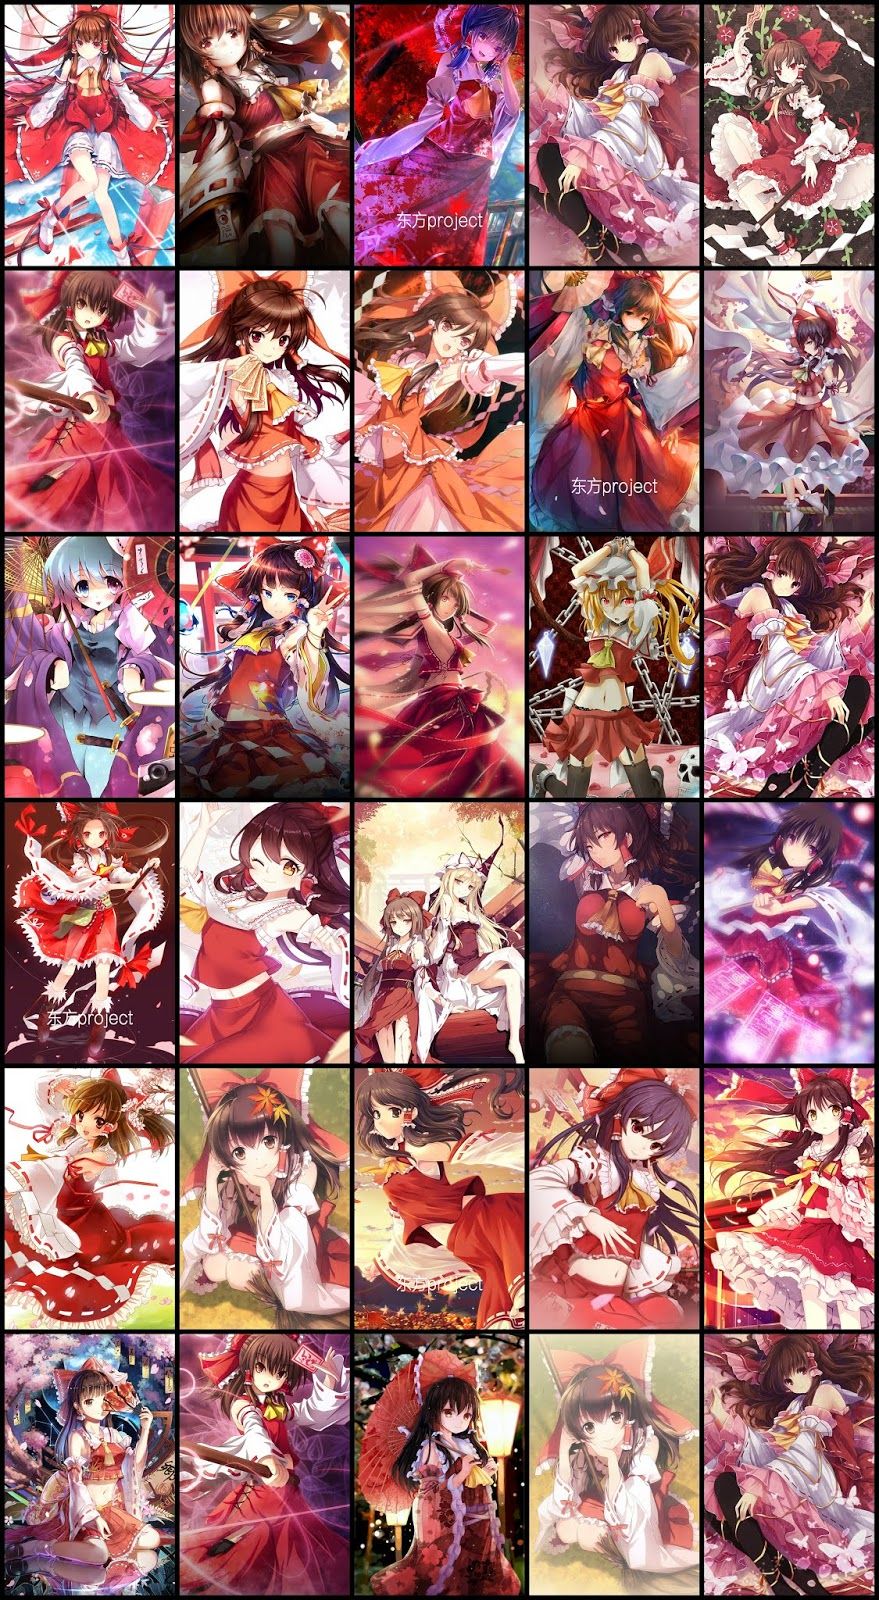 Touhou project wallpaper pack for mobile phone part anime artwork wallpaper anime artwork anime printables